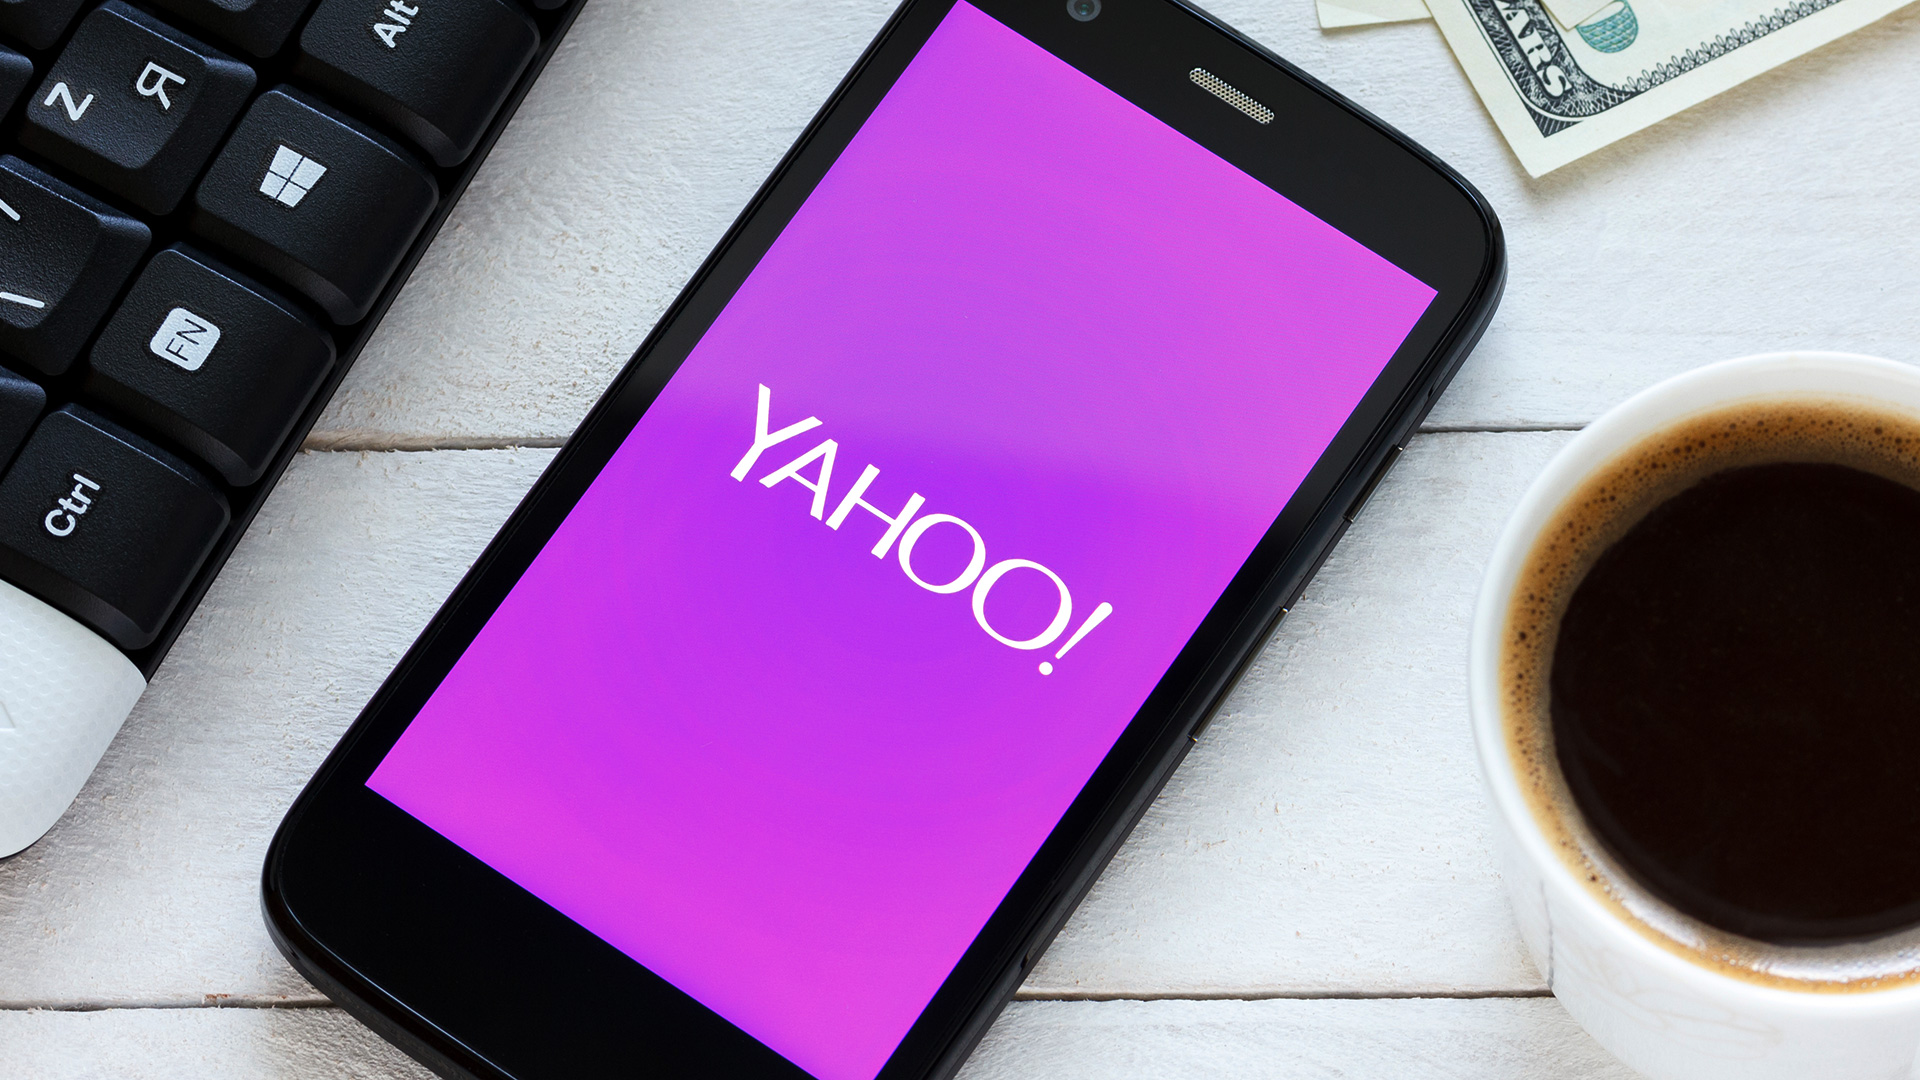 yahoo-app-mobile-android-ss-1920